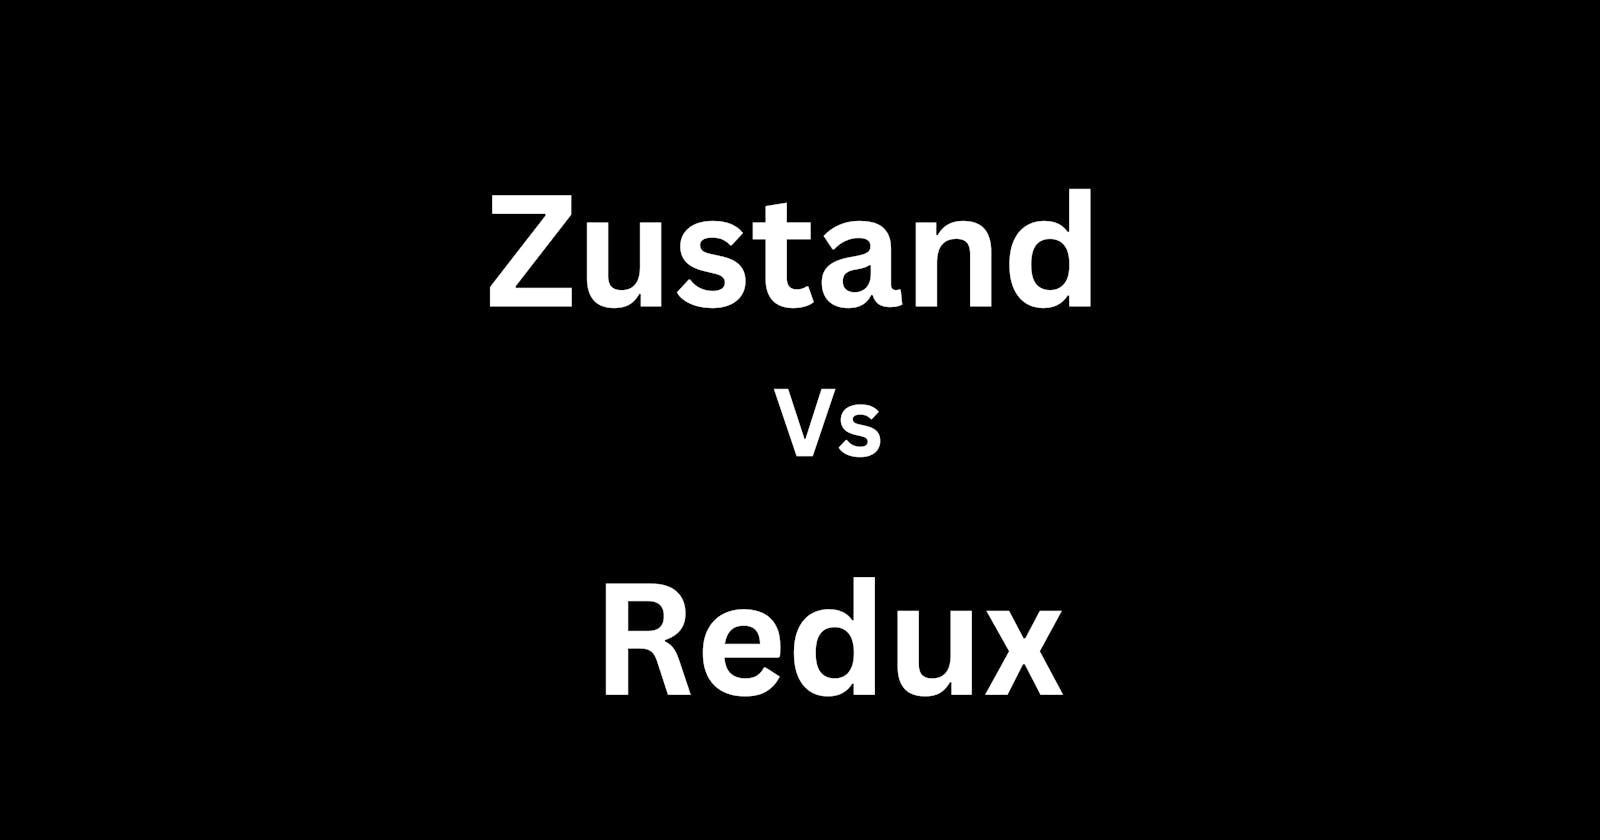 Comparison between Zustand and Redux